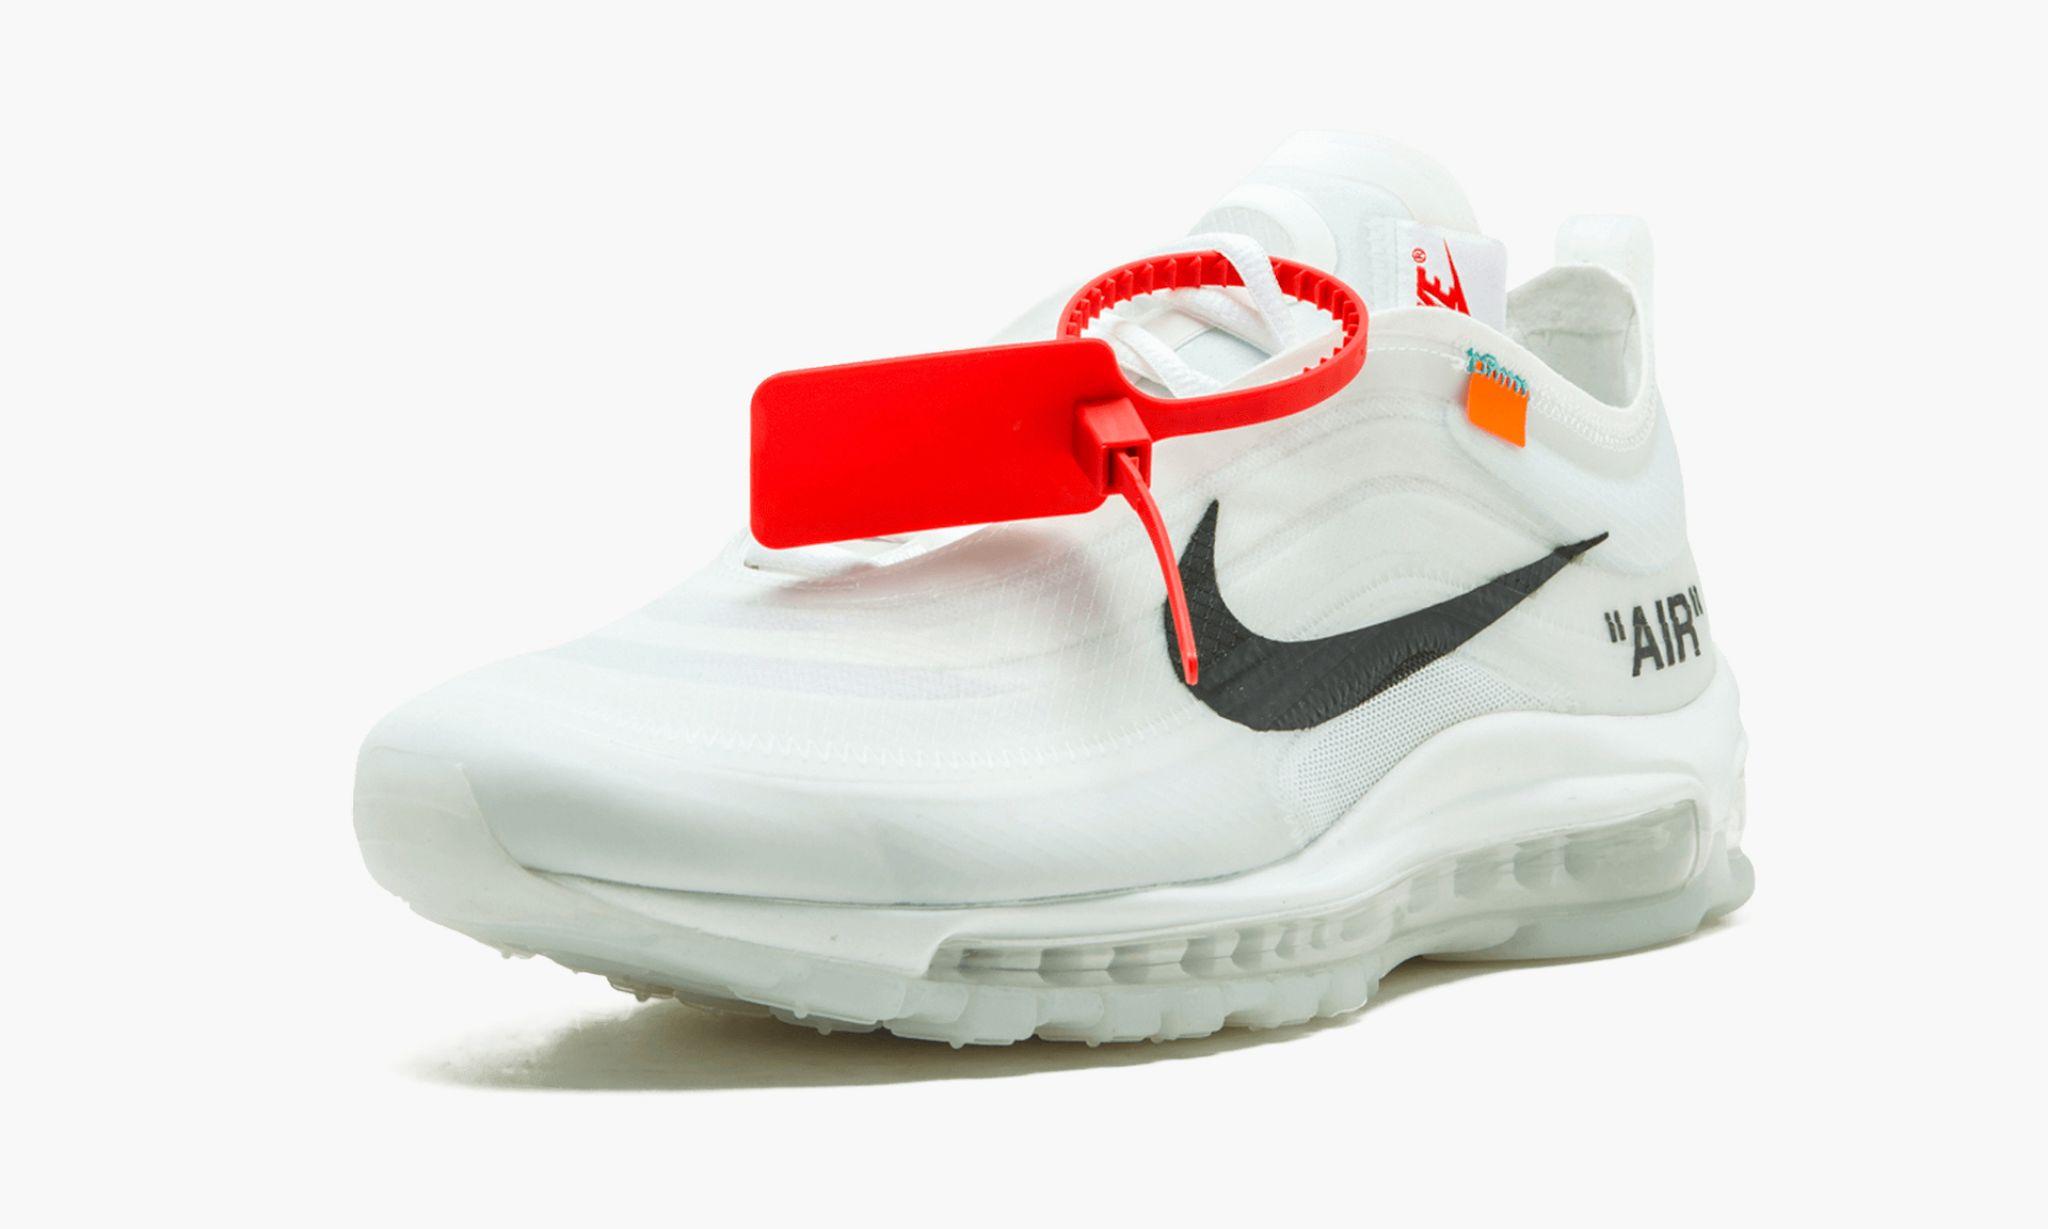 NIKE X OFF-WHITE Synthetic The 10 : Nike Air Max 97 Og 